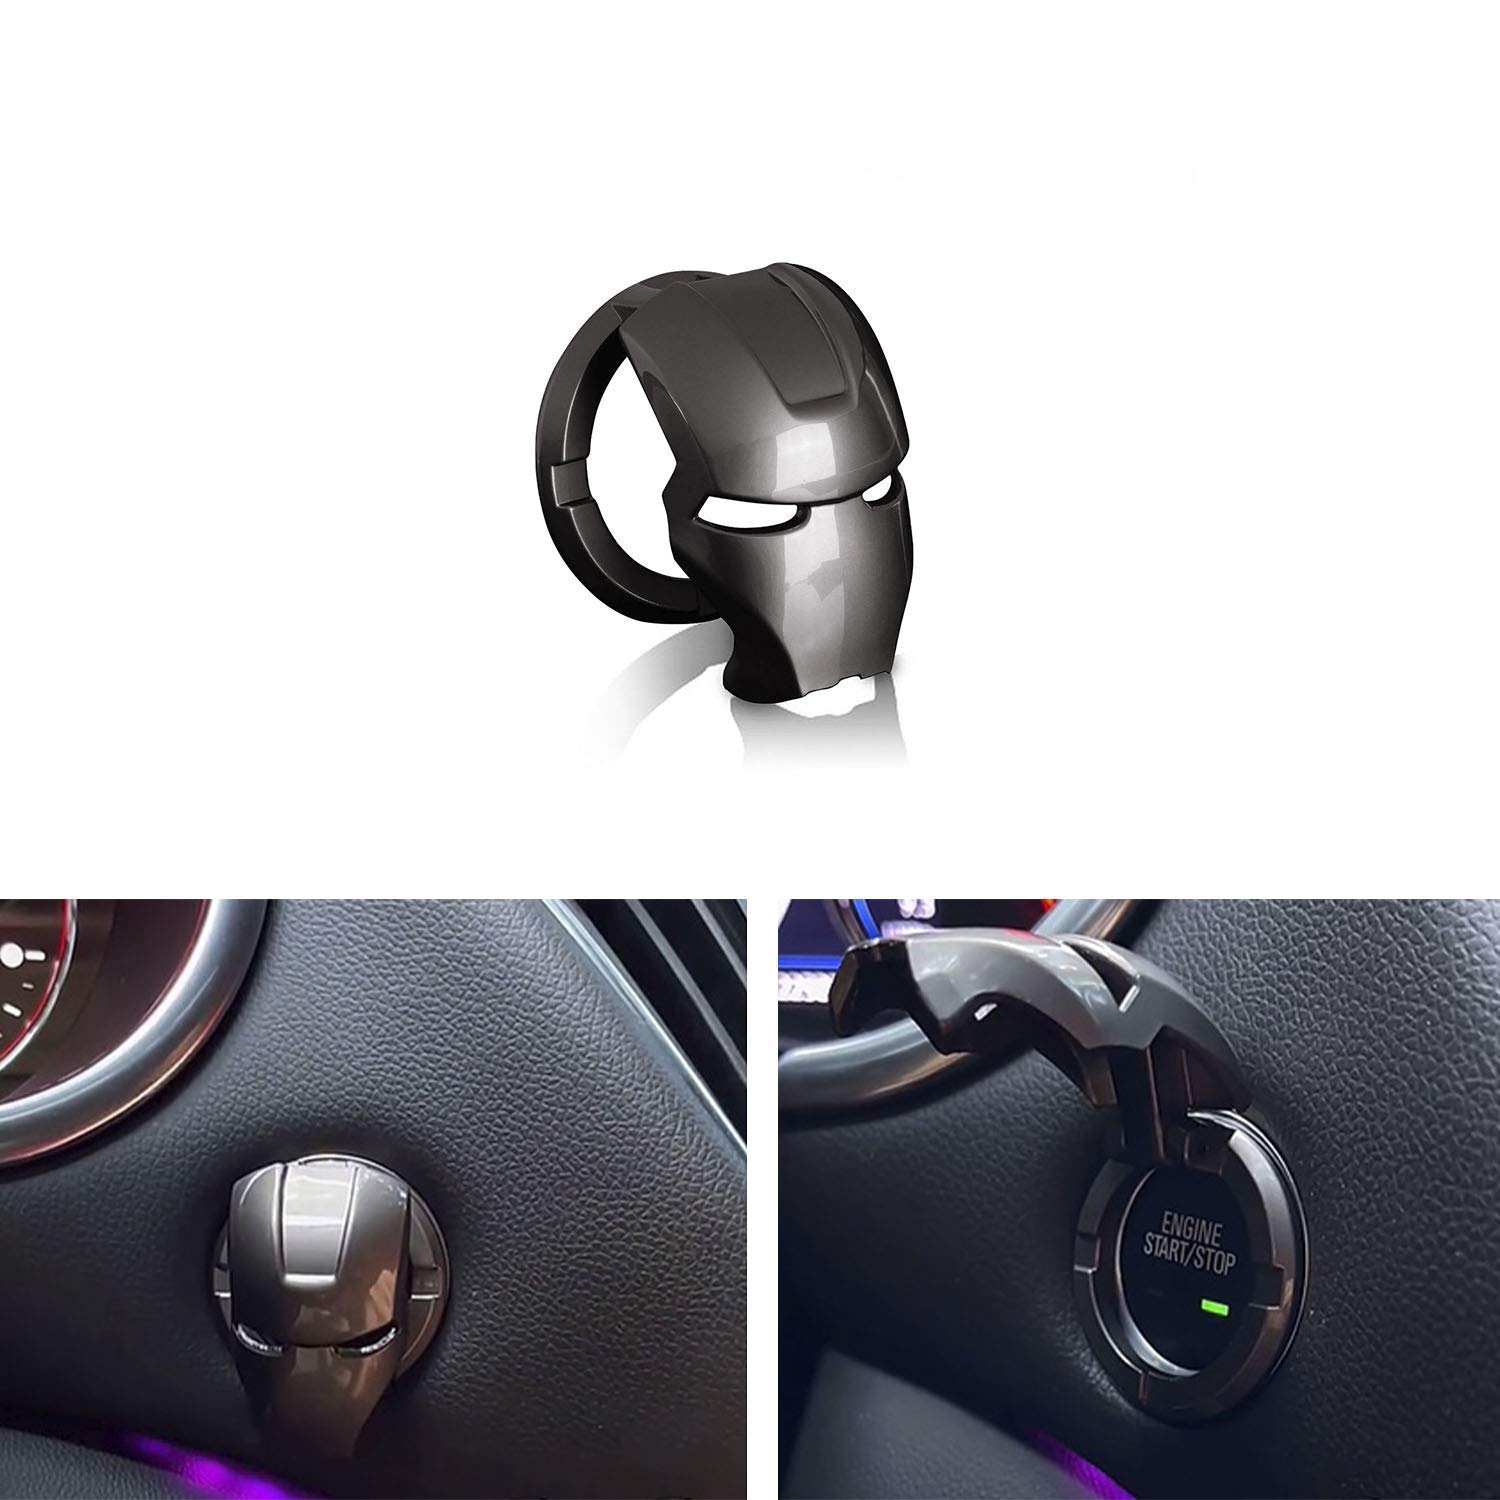 Iron Man Start Button Cover Universal Car Engine Switch Cover for Protection Engine Start Stop Button Cover 